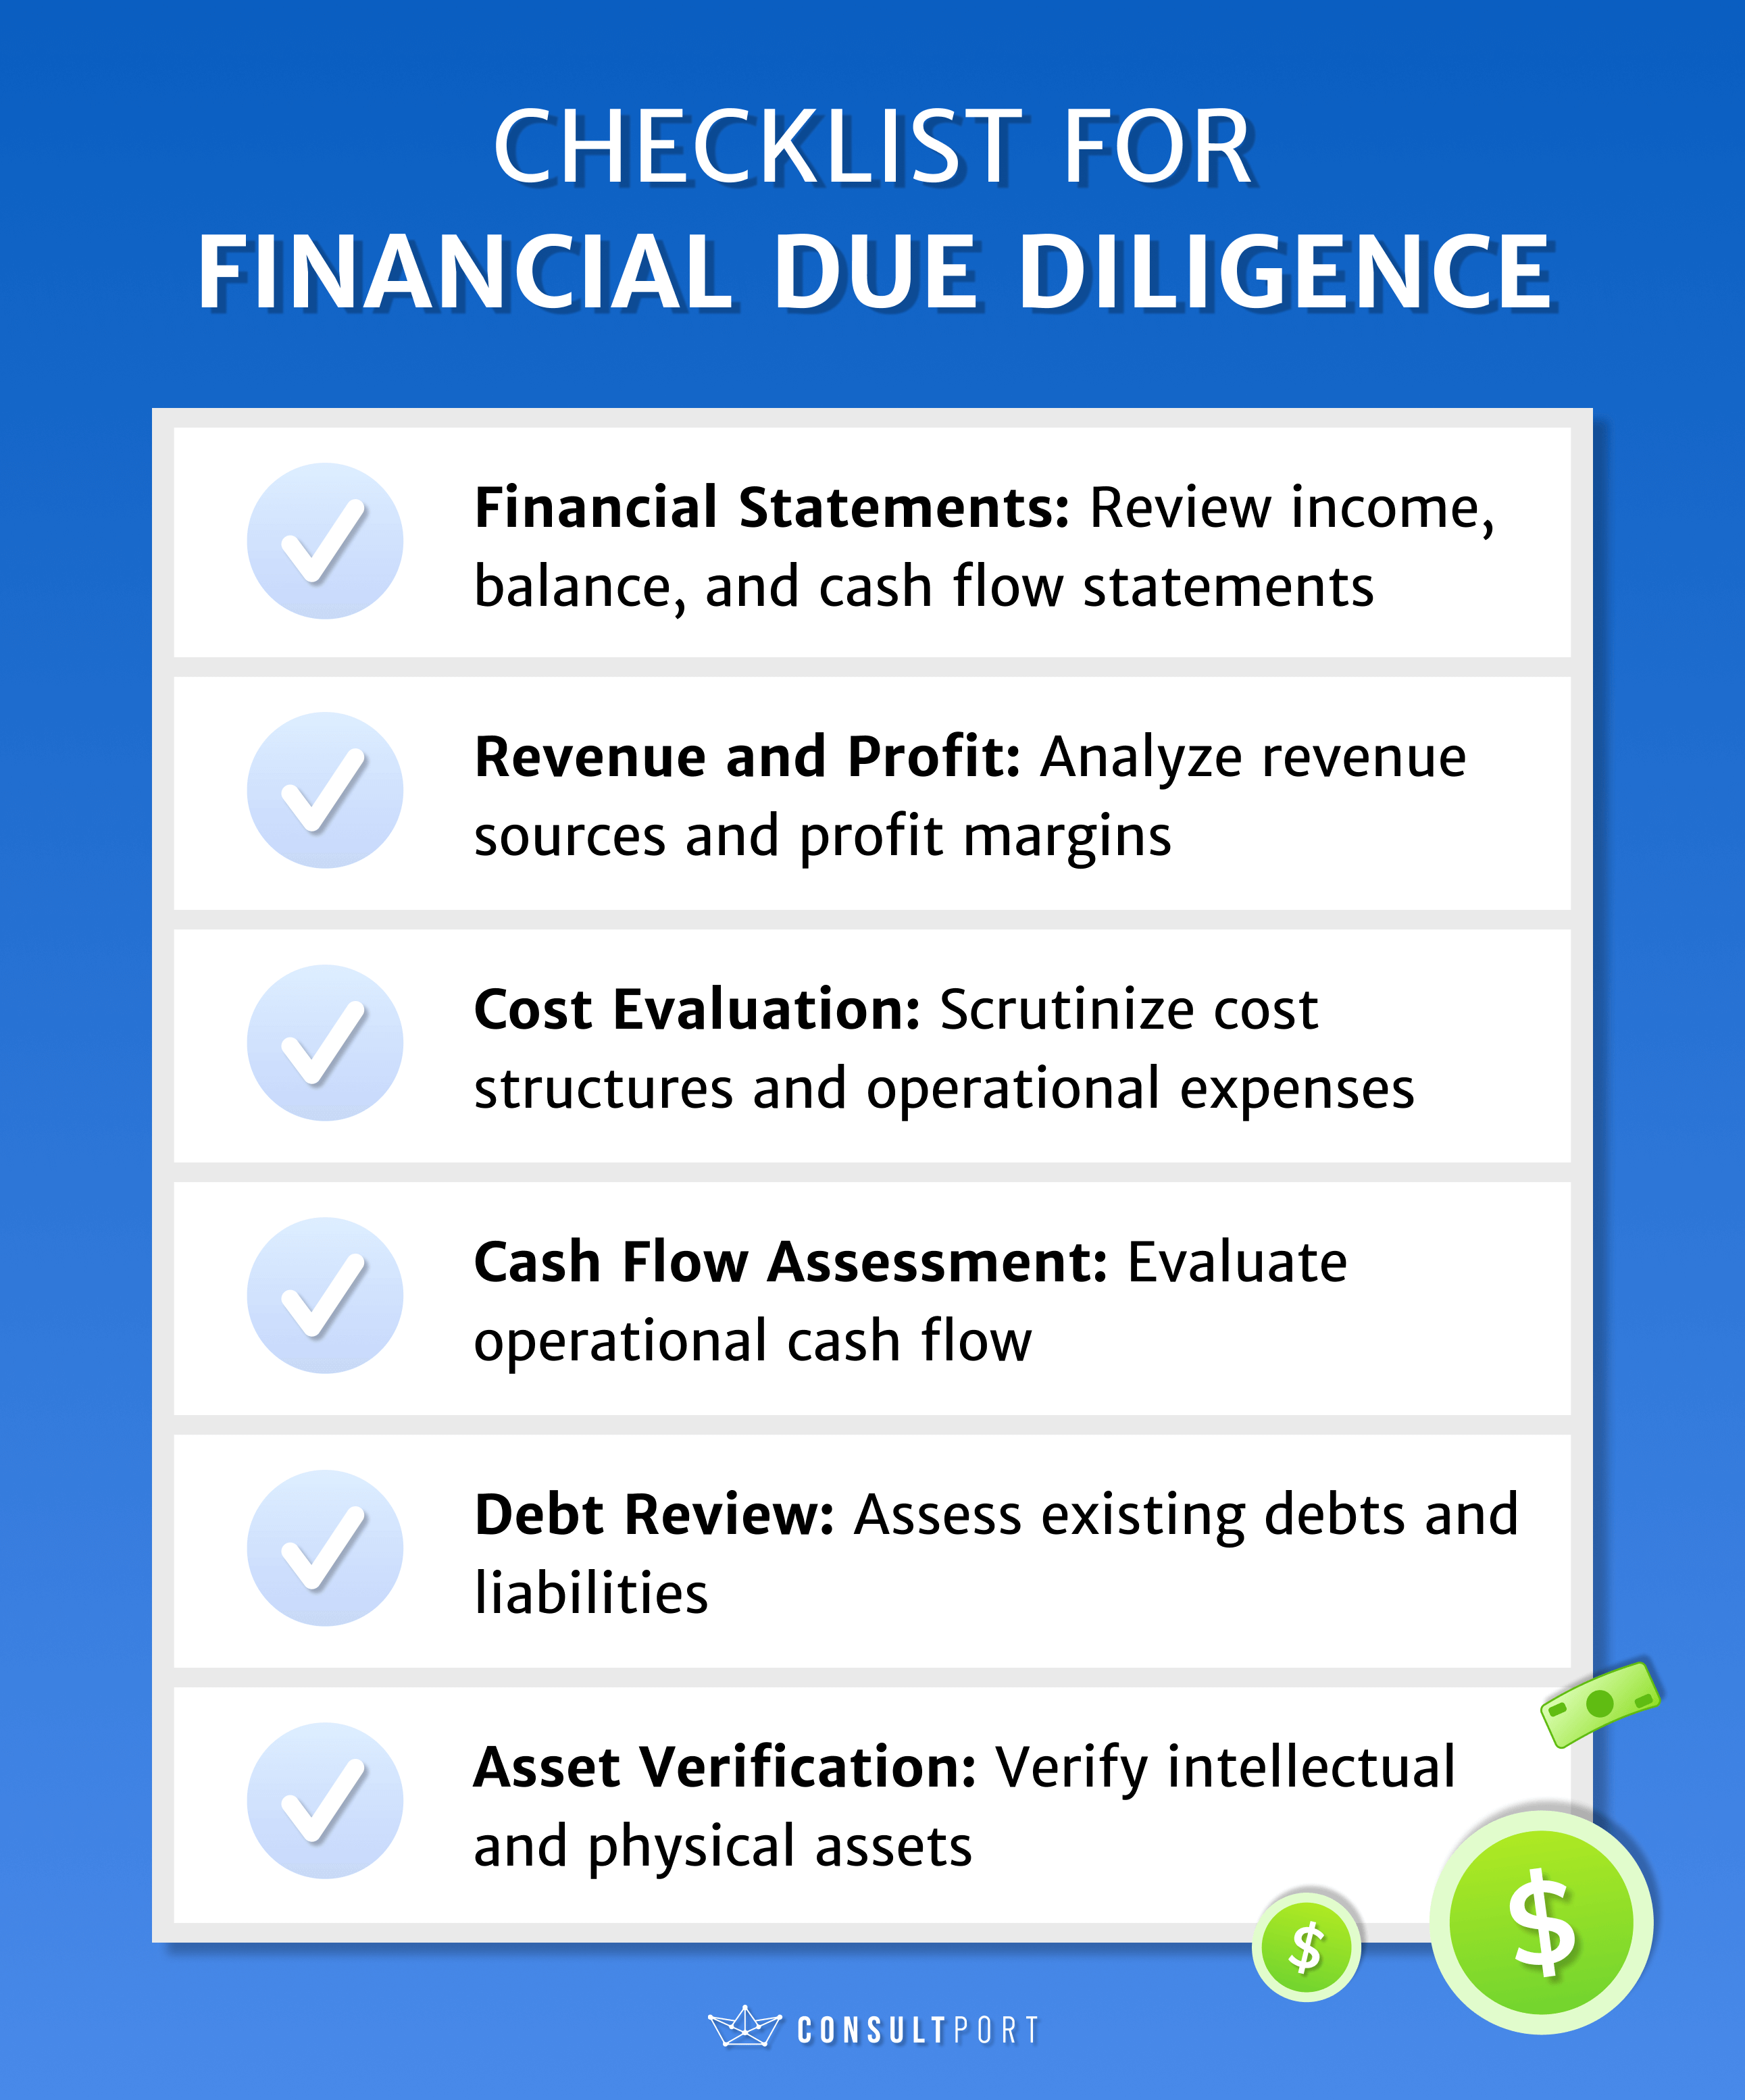 CHECKLIST FOR FINANCIAL DUE DILIGENCE infographic